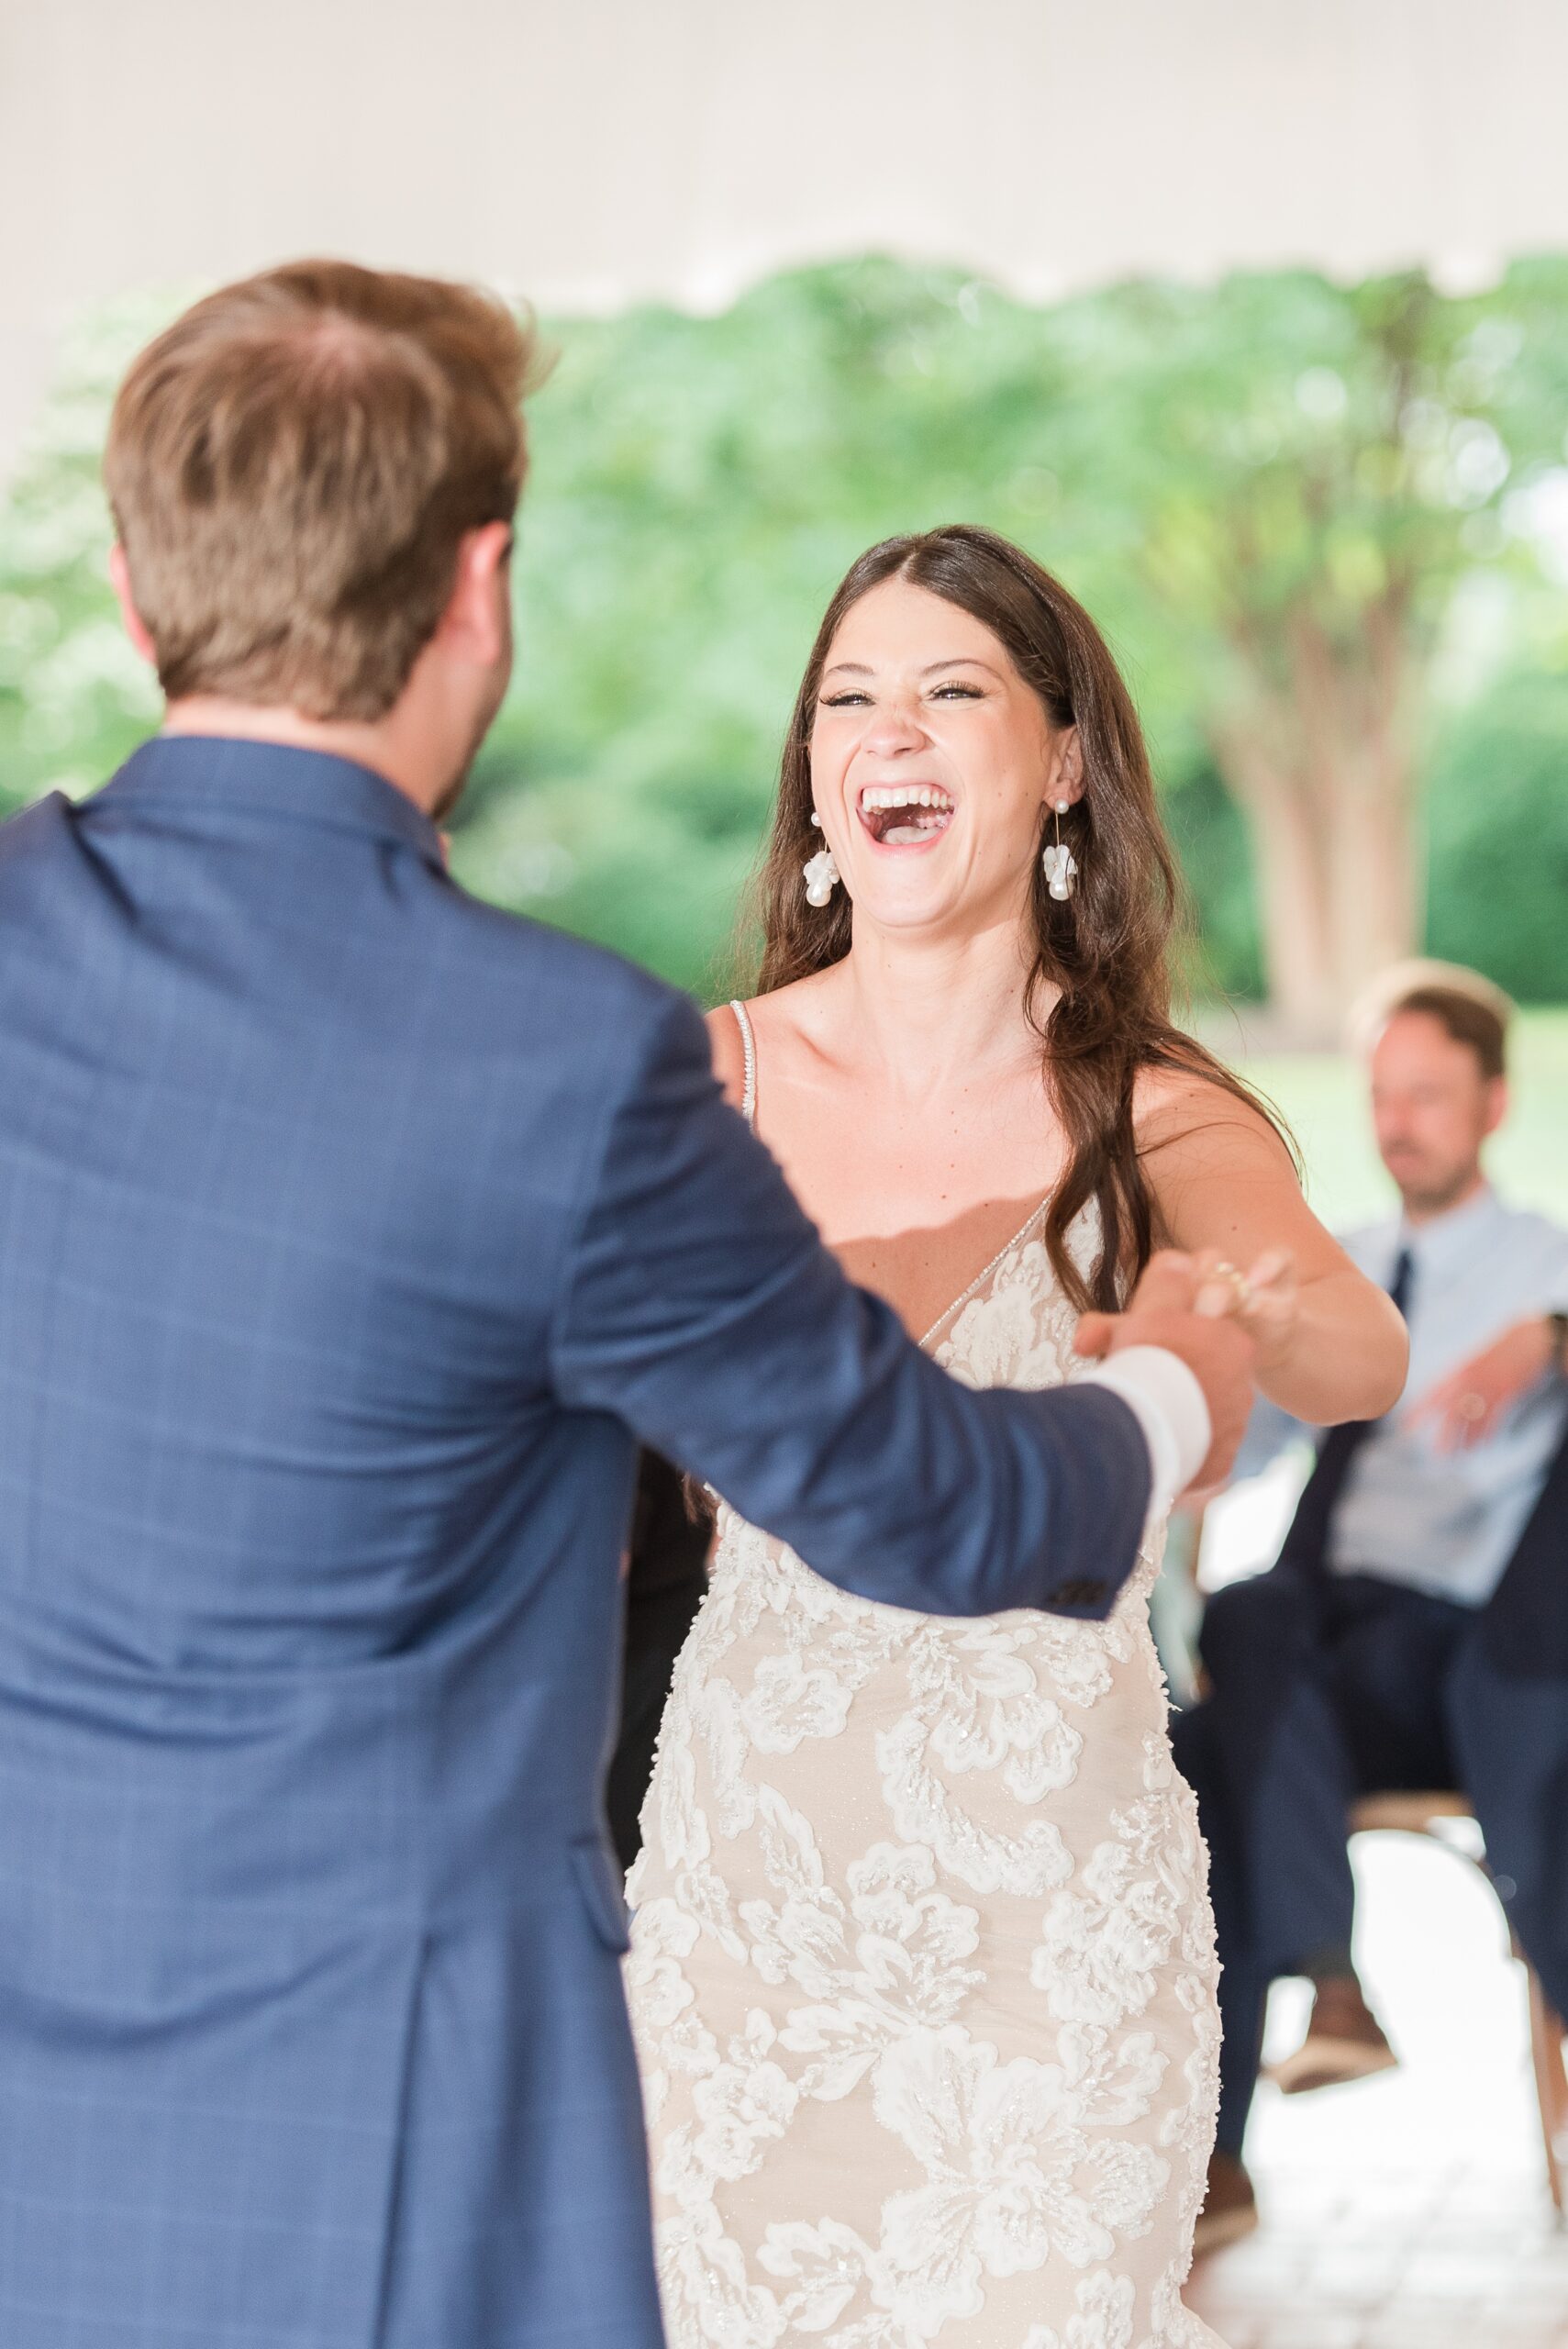 A bride laughs big while dancing with her groom on the dance floor